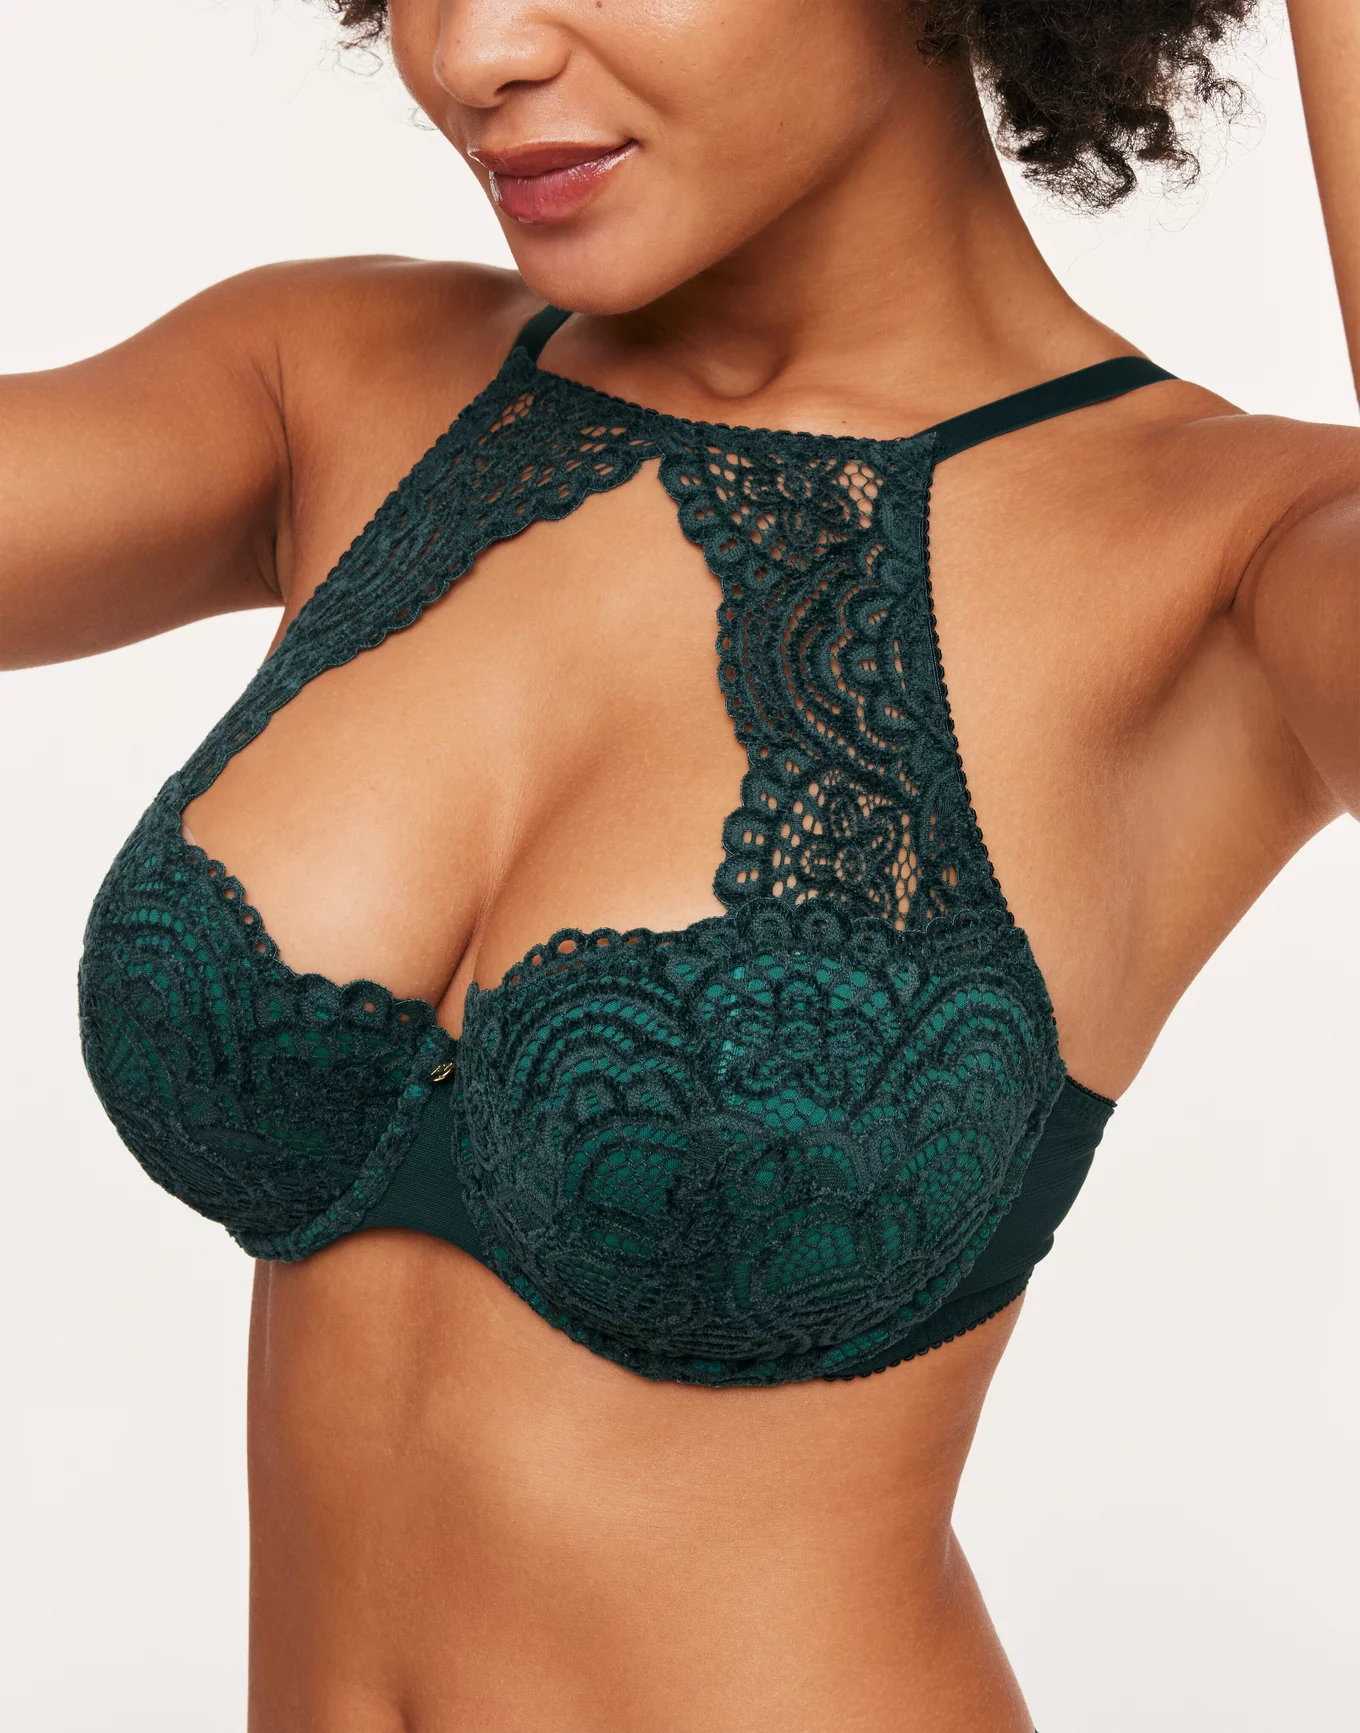 Green Push Up Bra And Panties Set Back Luxury Romantic Underwear For Women,  Comfortable Cotton Lingerie LJ201031 From Jiao02, $11.06